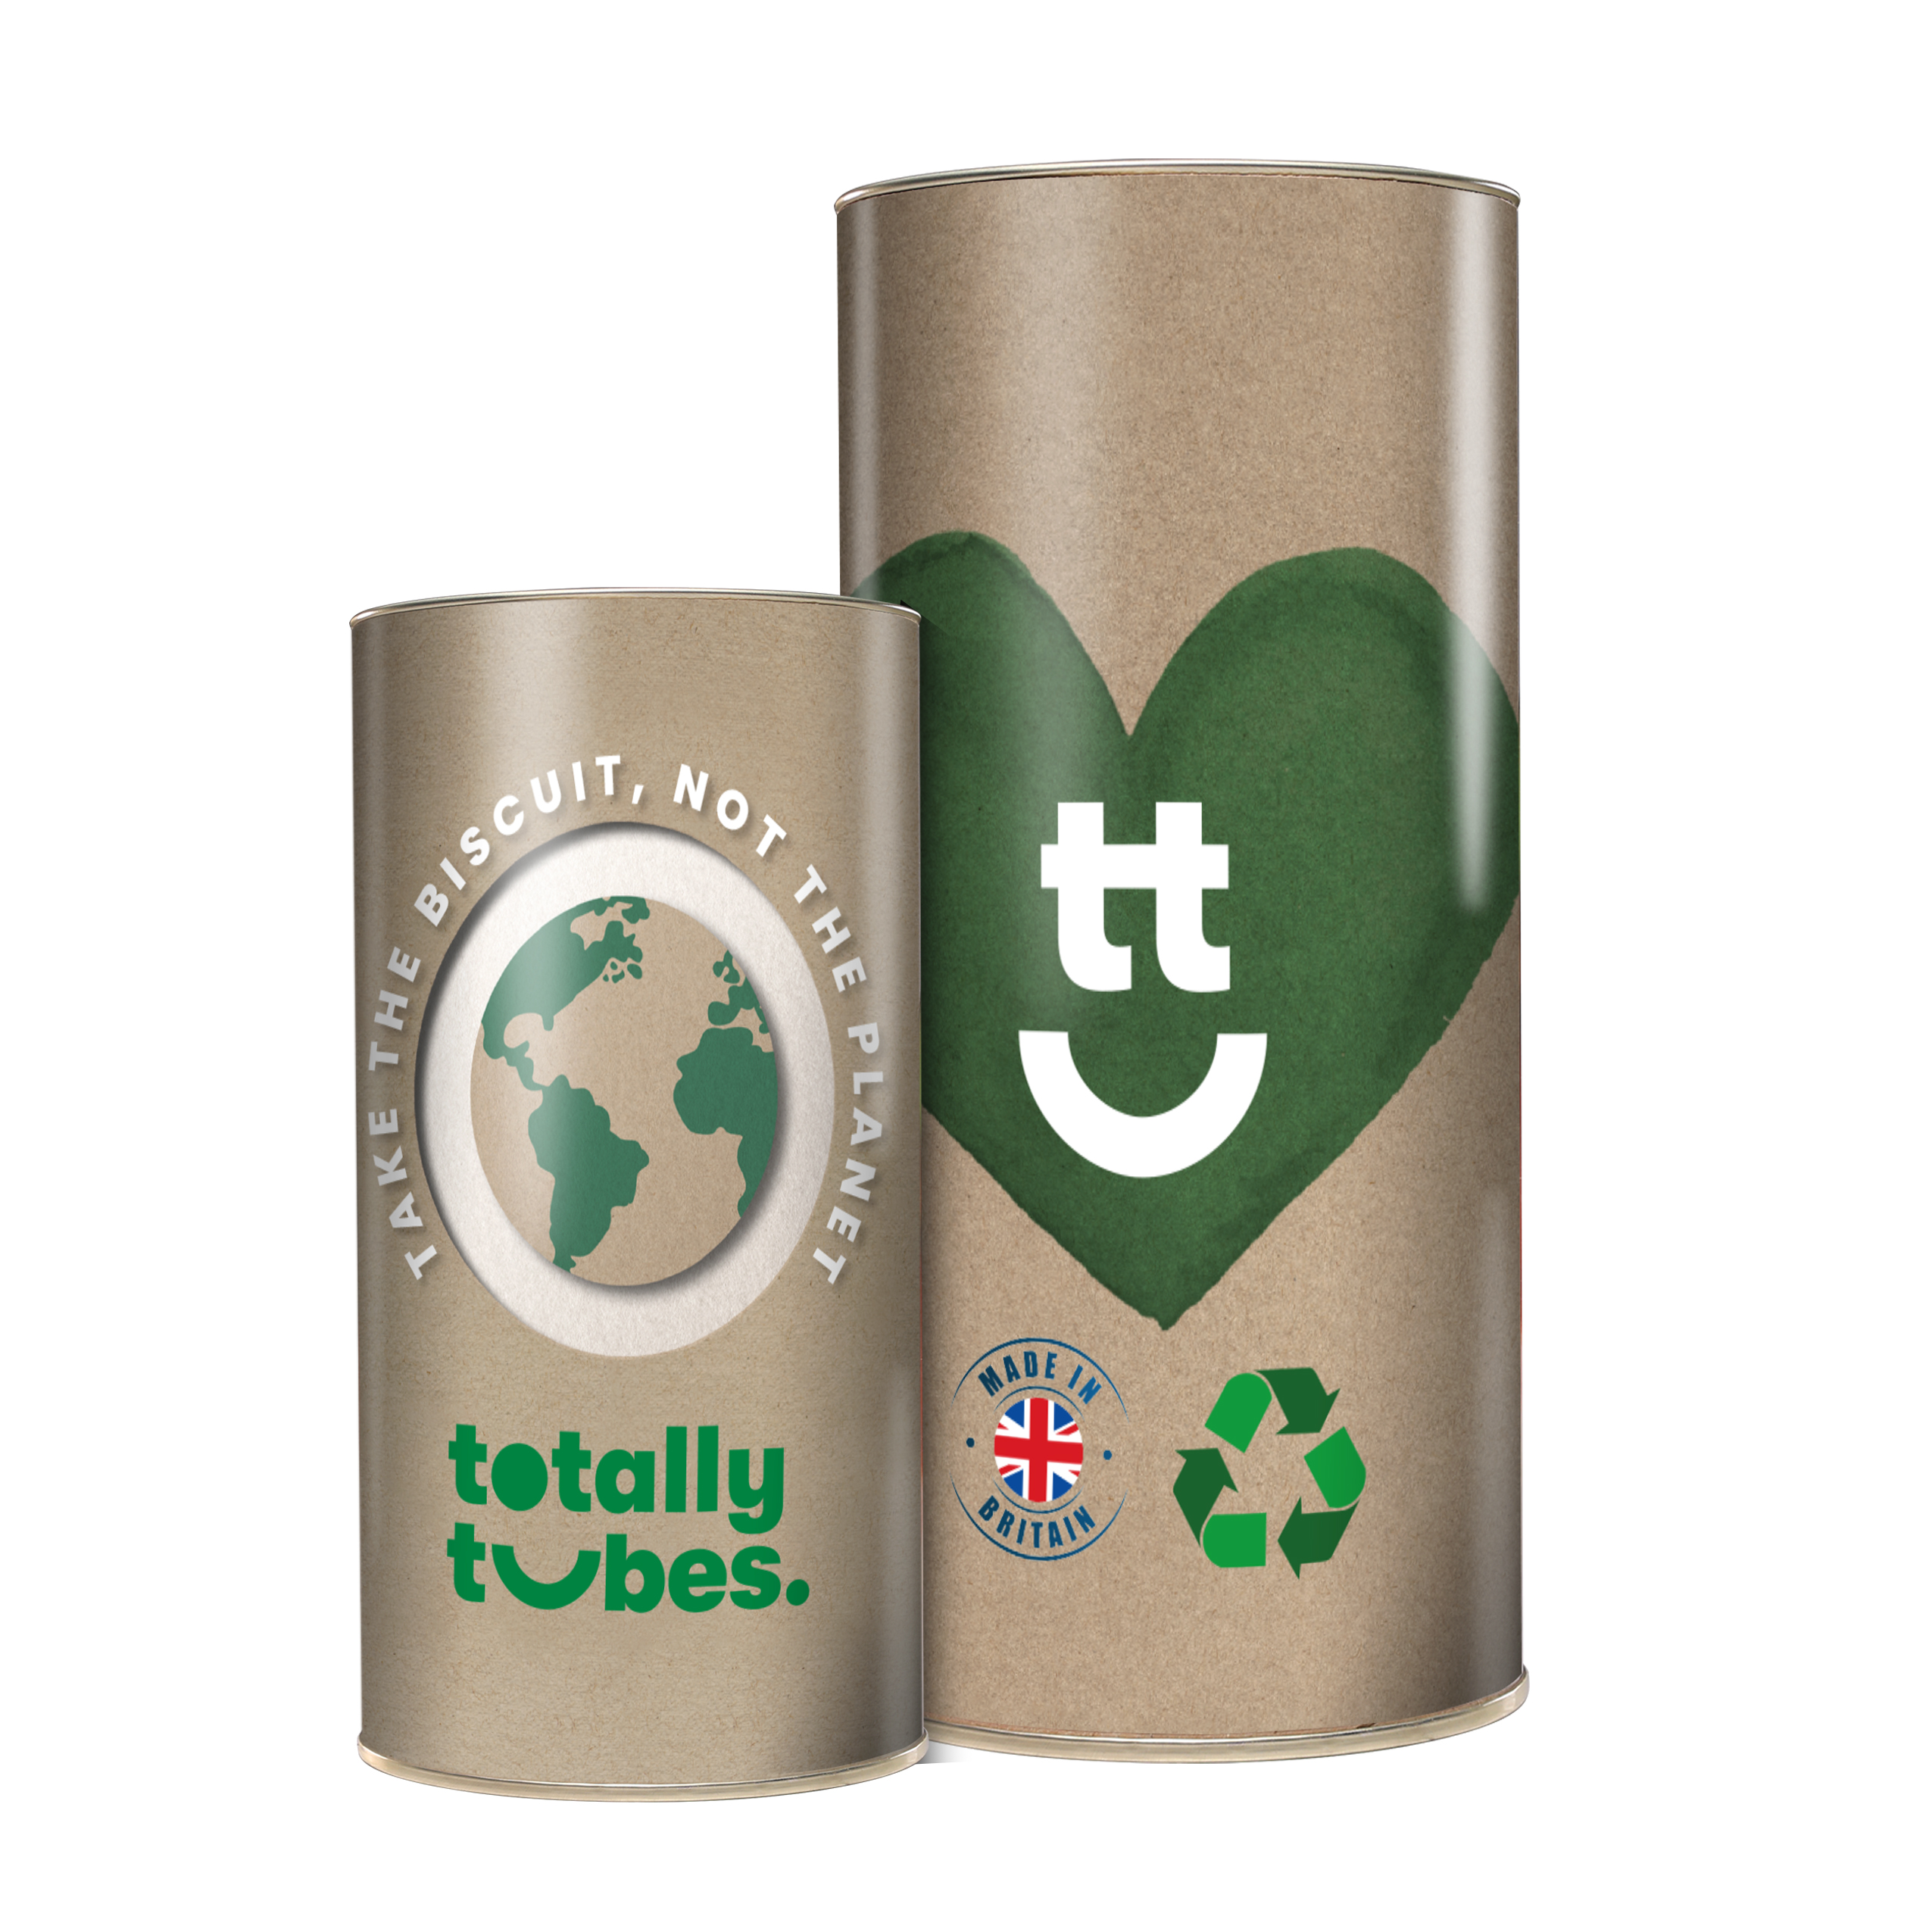 Eco friendly biscuit gifts from totally tubes